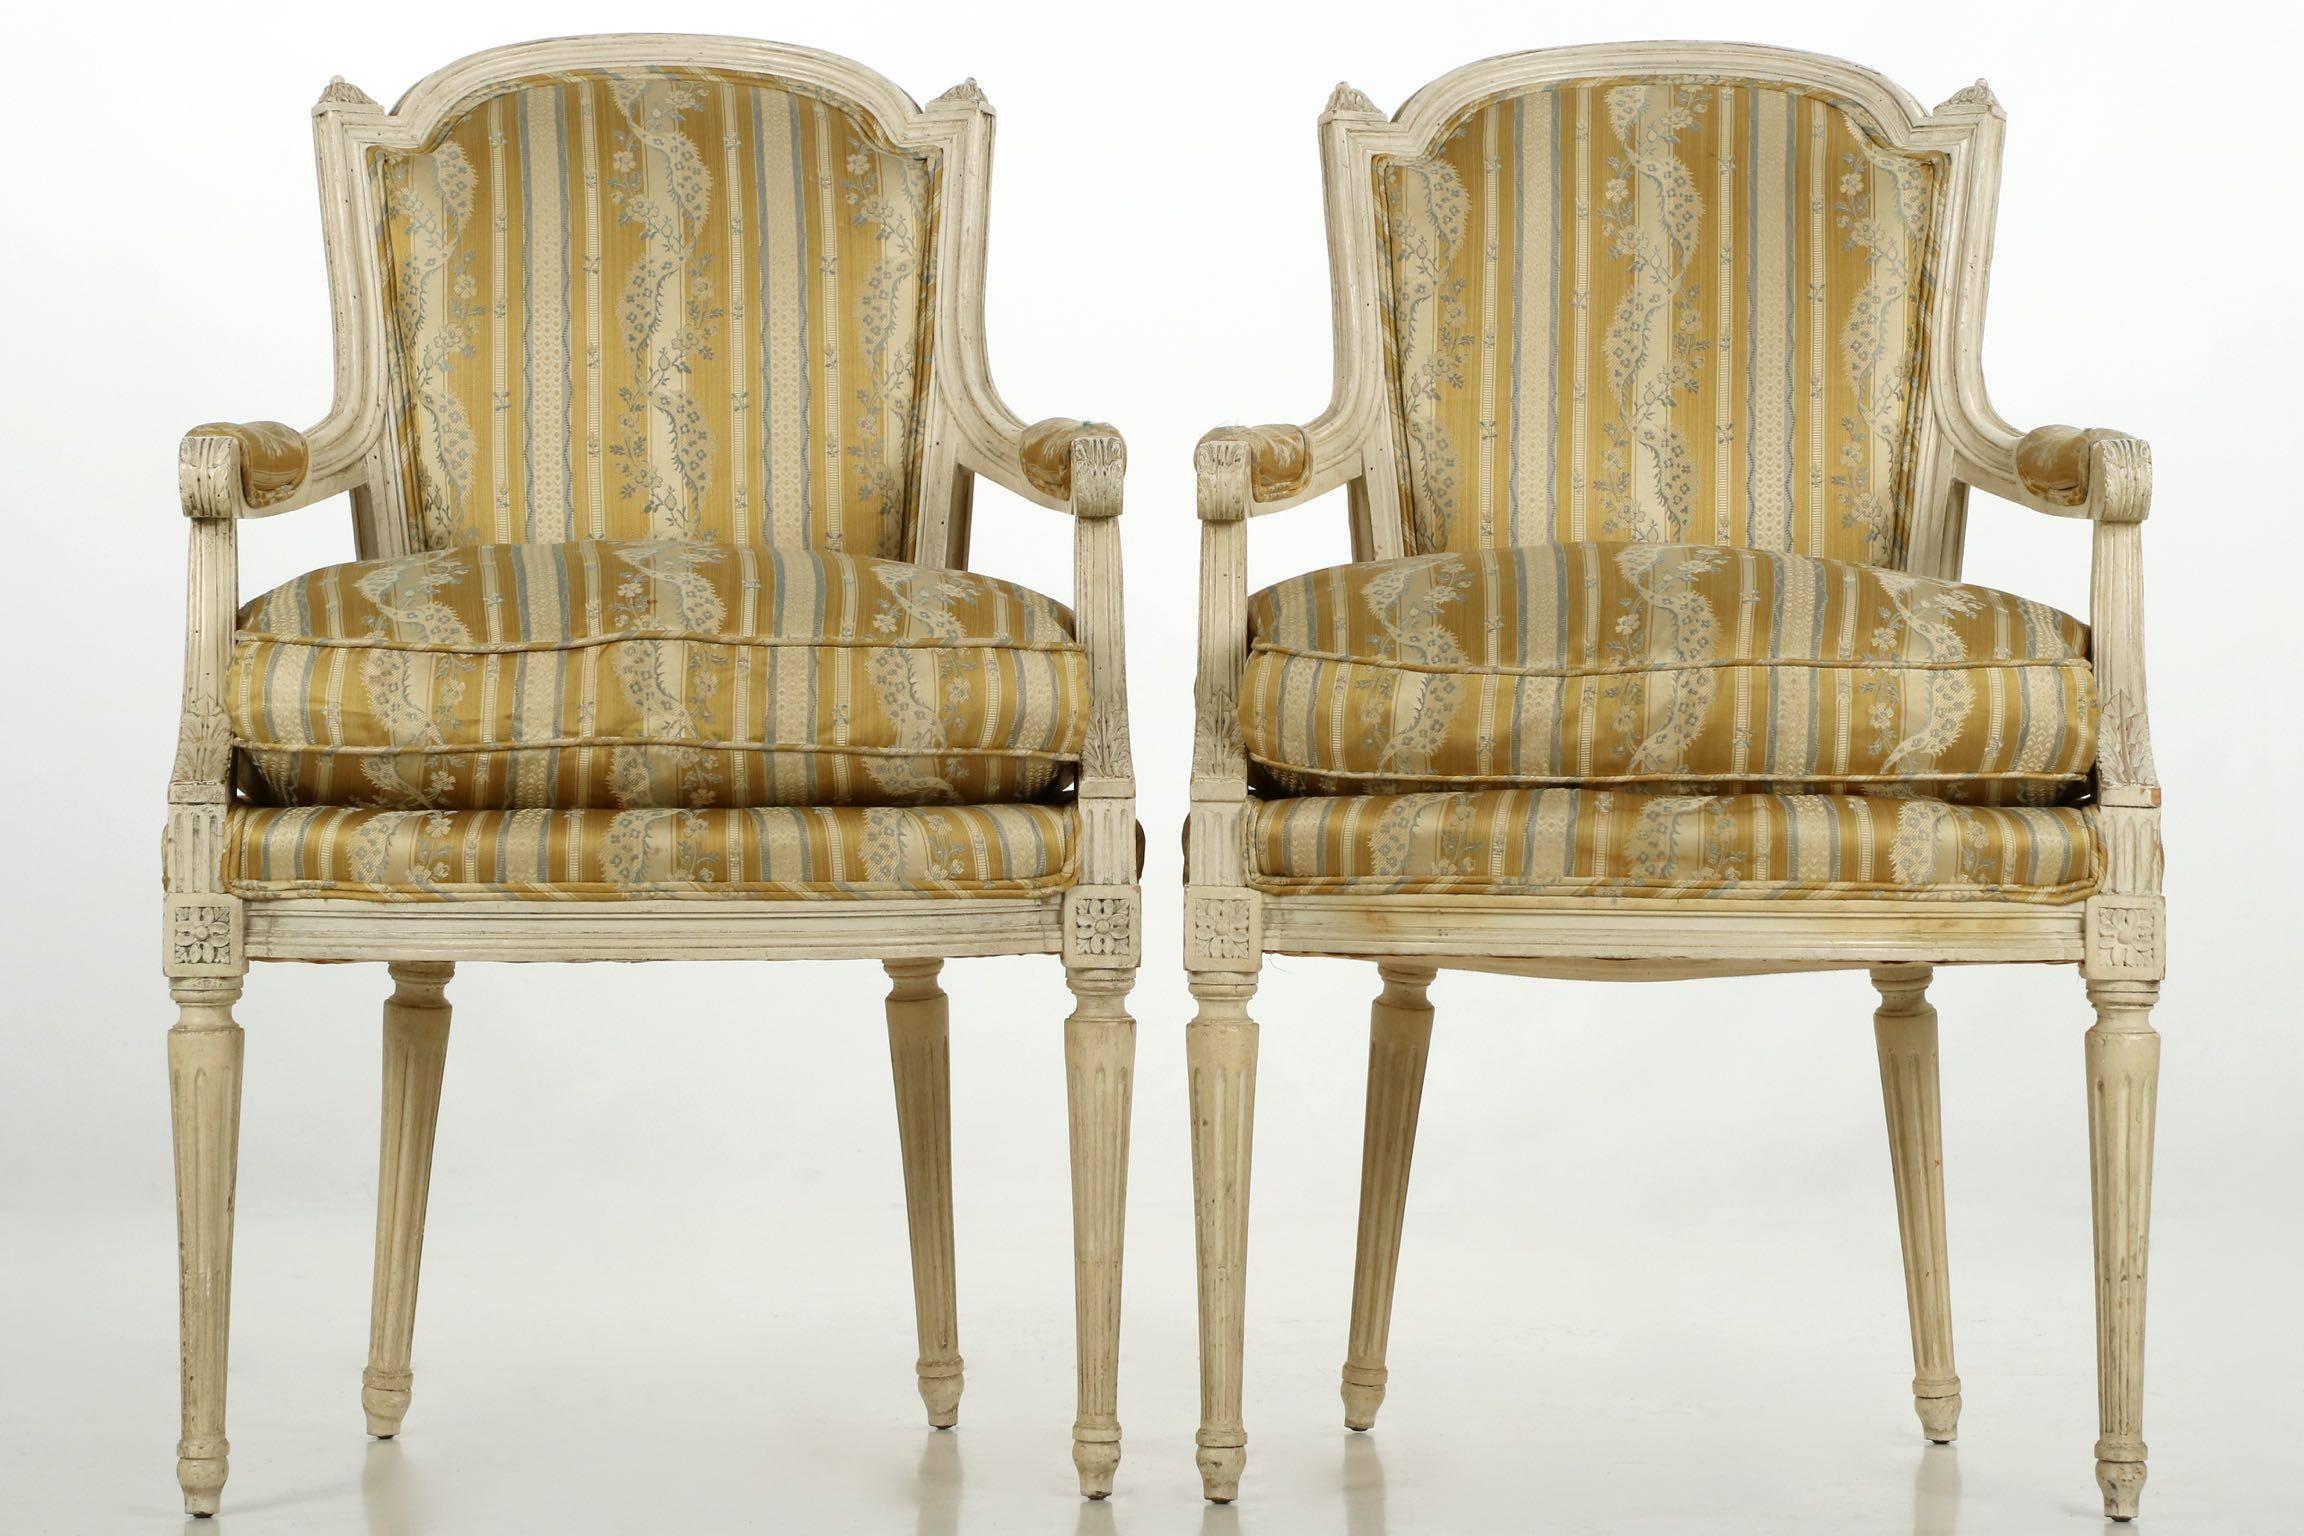 A most attractive pair of early 20th century armchairs, these closely mirror the original form of the late 18th century, the handcrafted frames with the pegged tenon-mortised joinery that made the originals so long lasting. The tight hand carving in